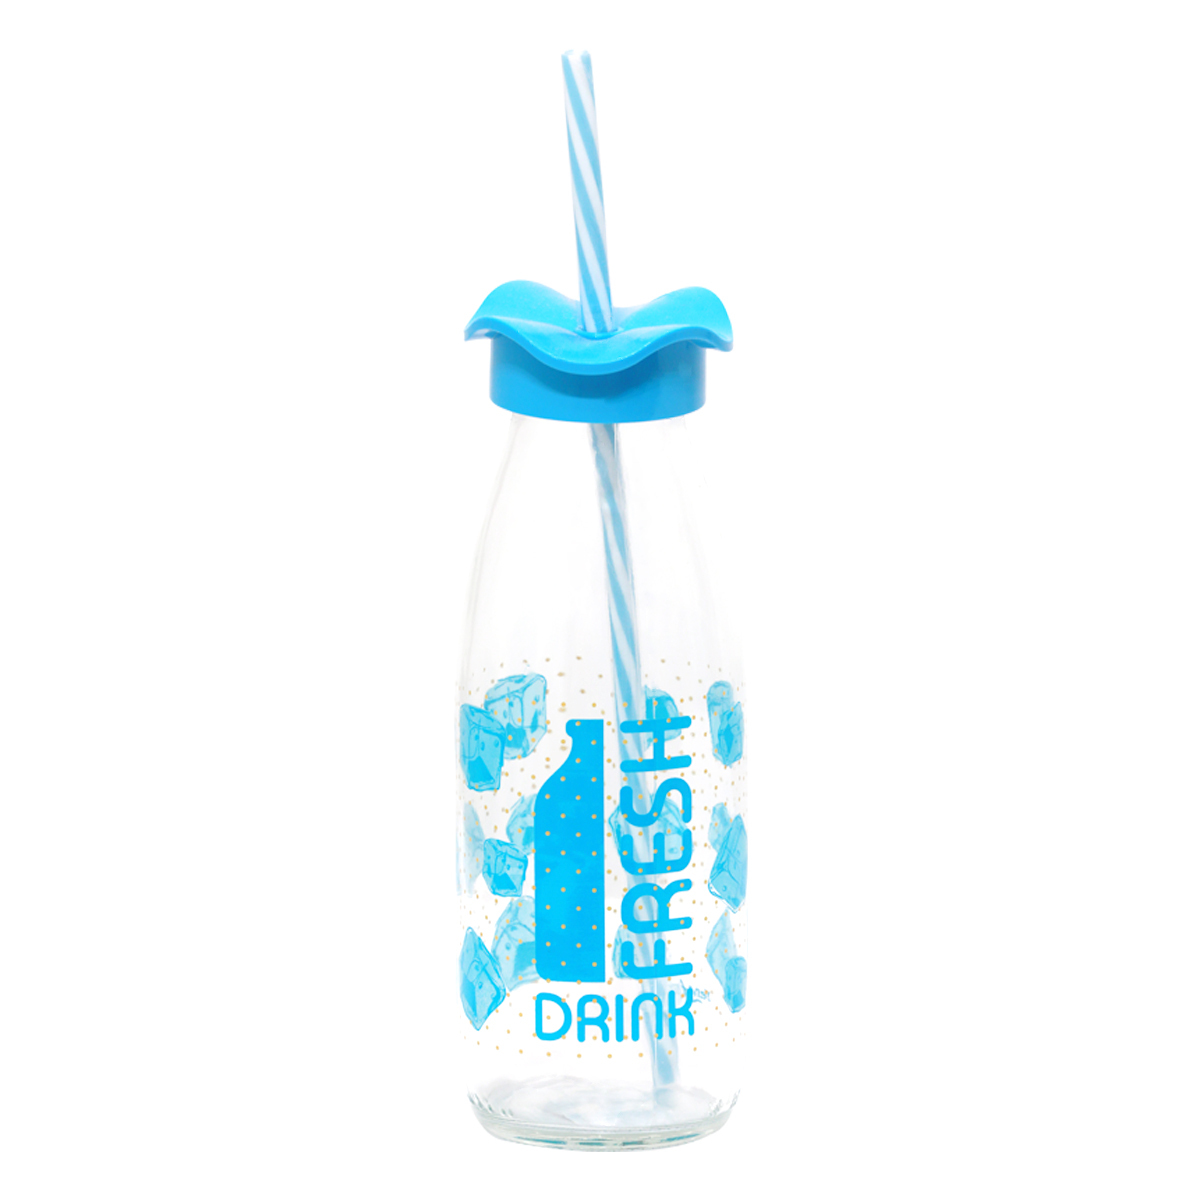 Renga Decorated Glass Milk Bottle With Lid Straw 500